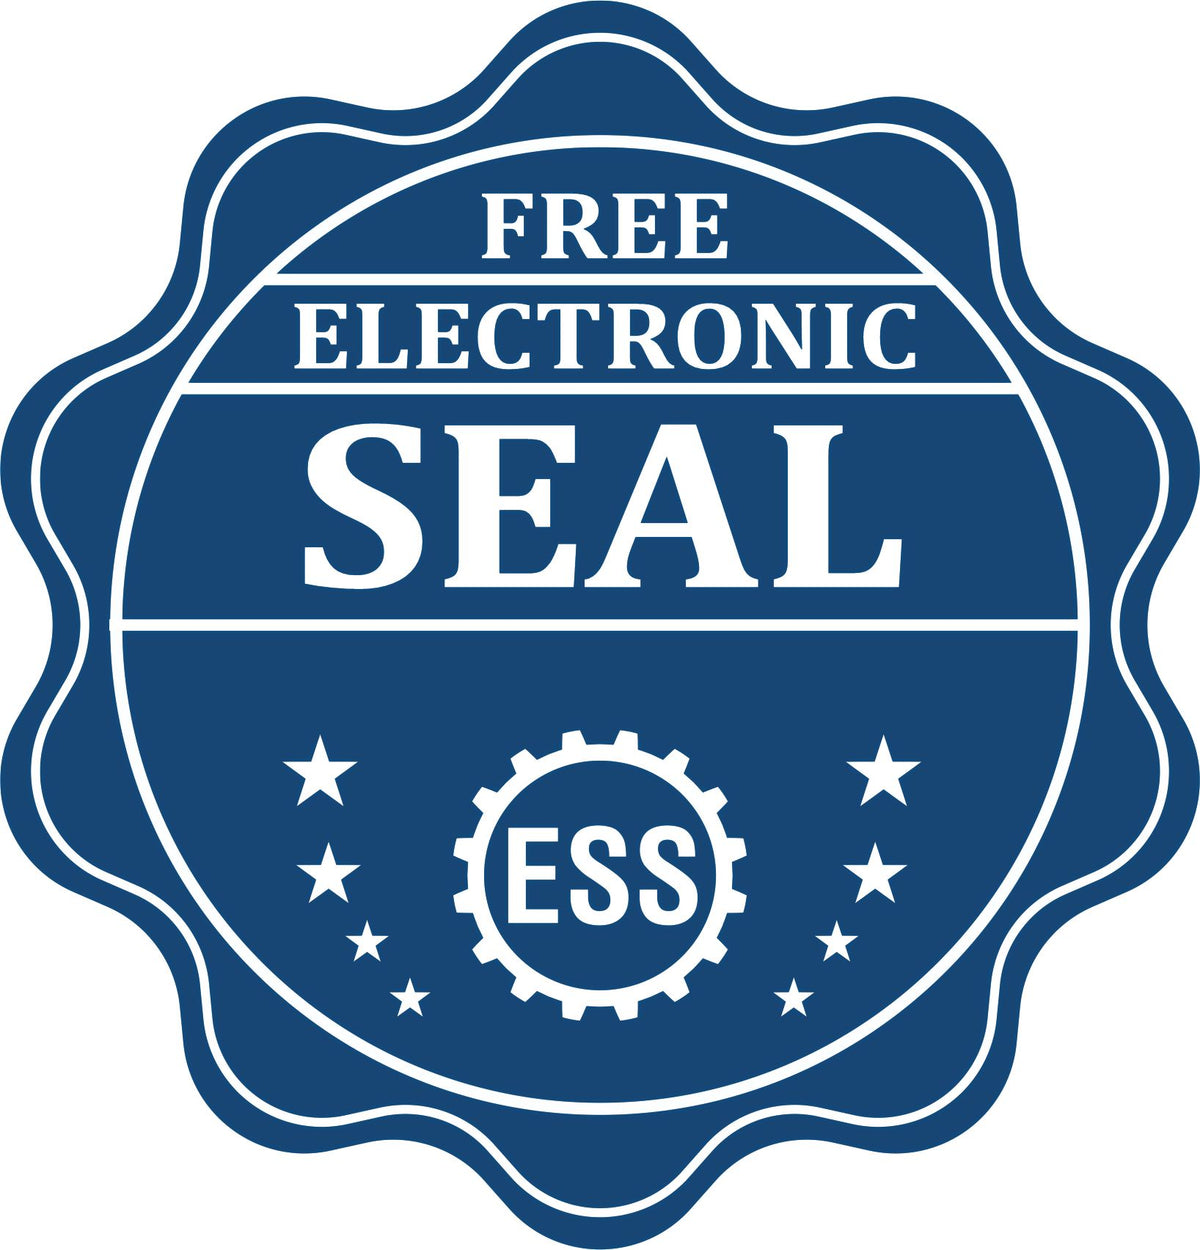 A badge showing a free electronic seal for the State of Missouri Soft Land Surveyor Embossing Seal with stars and the ESS gear on the emblem.